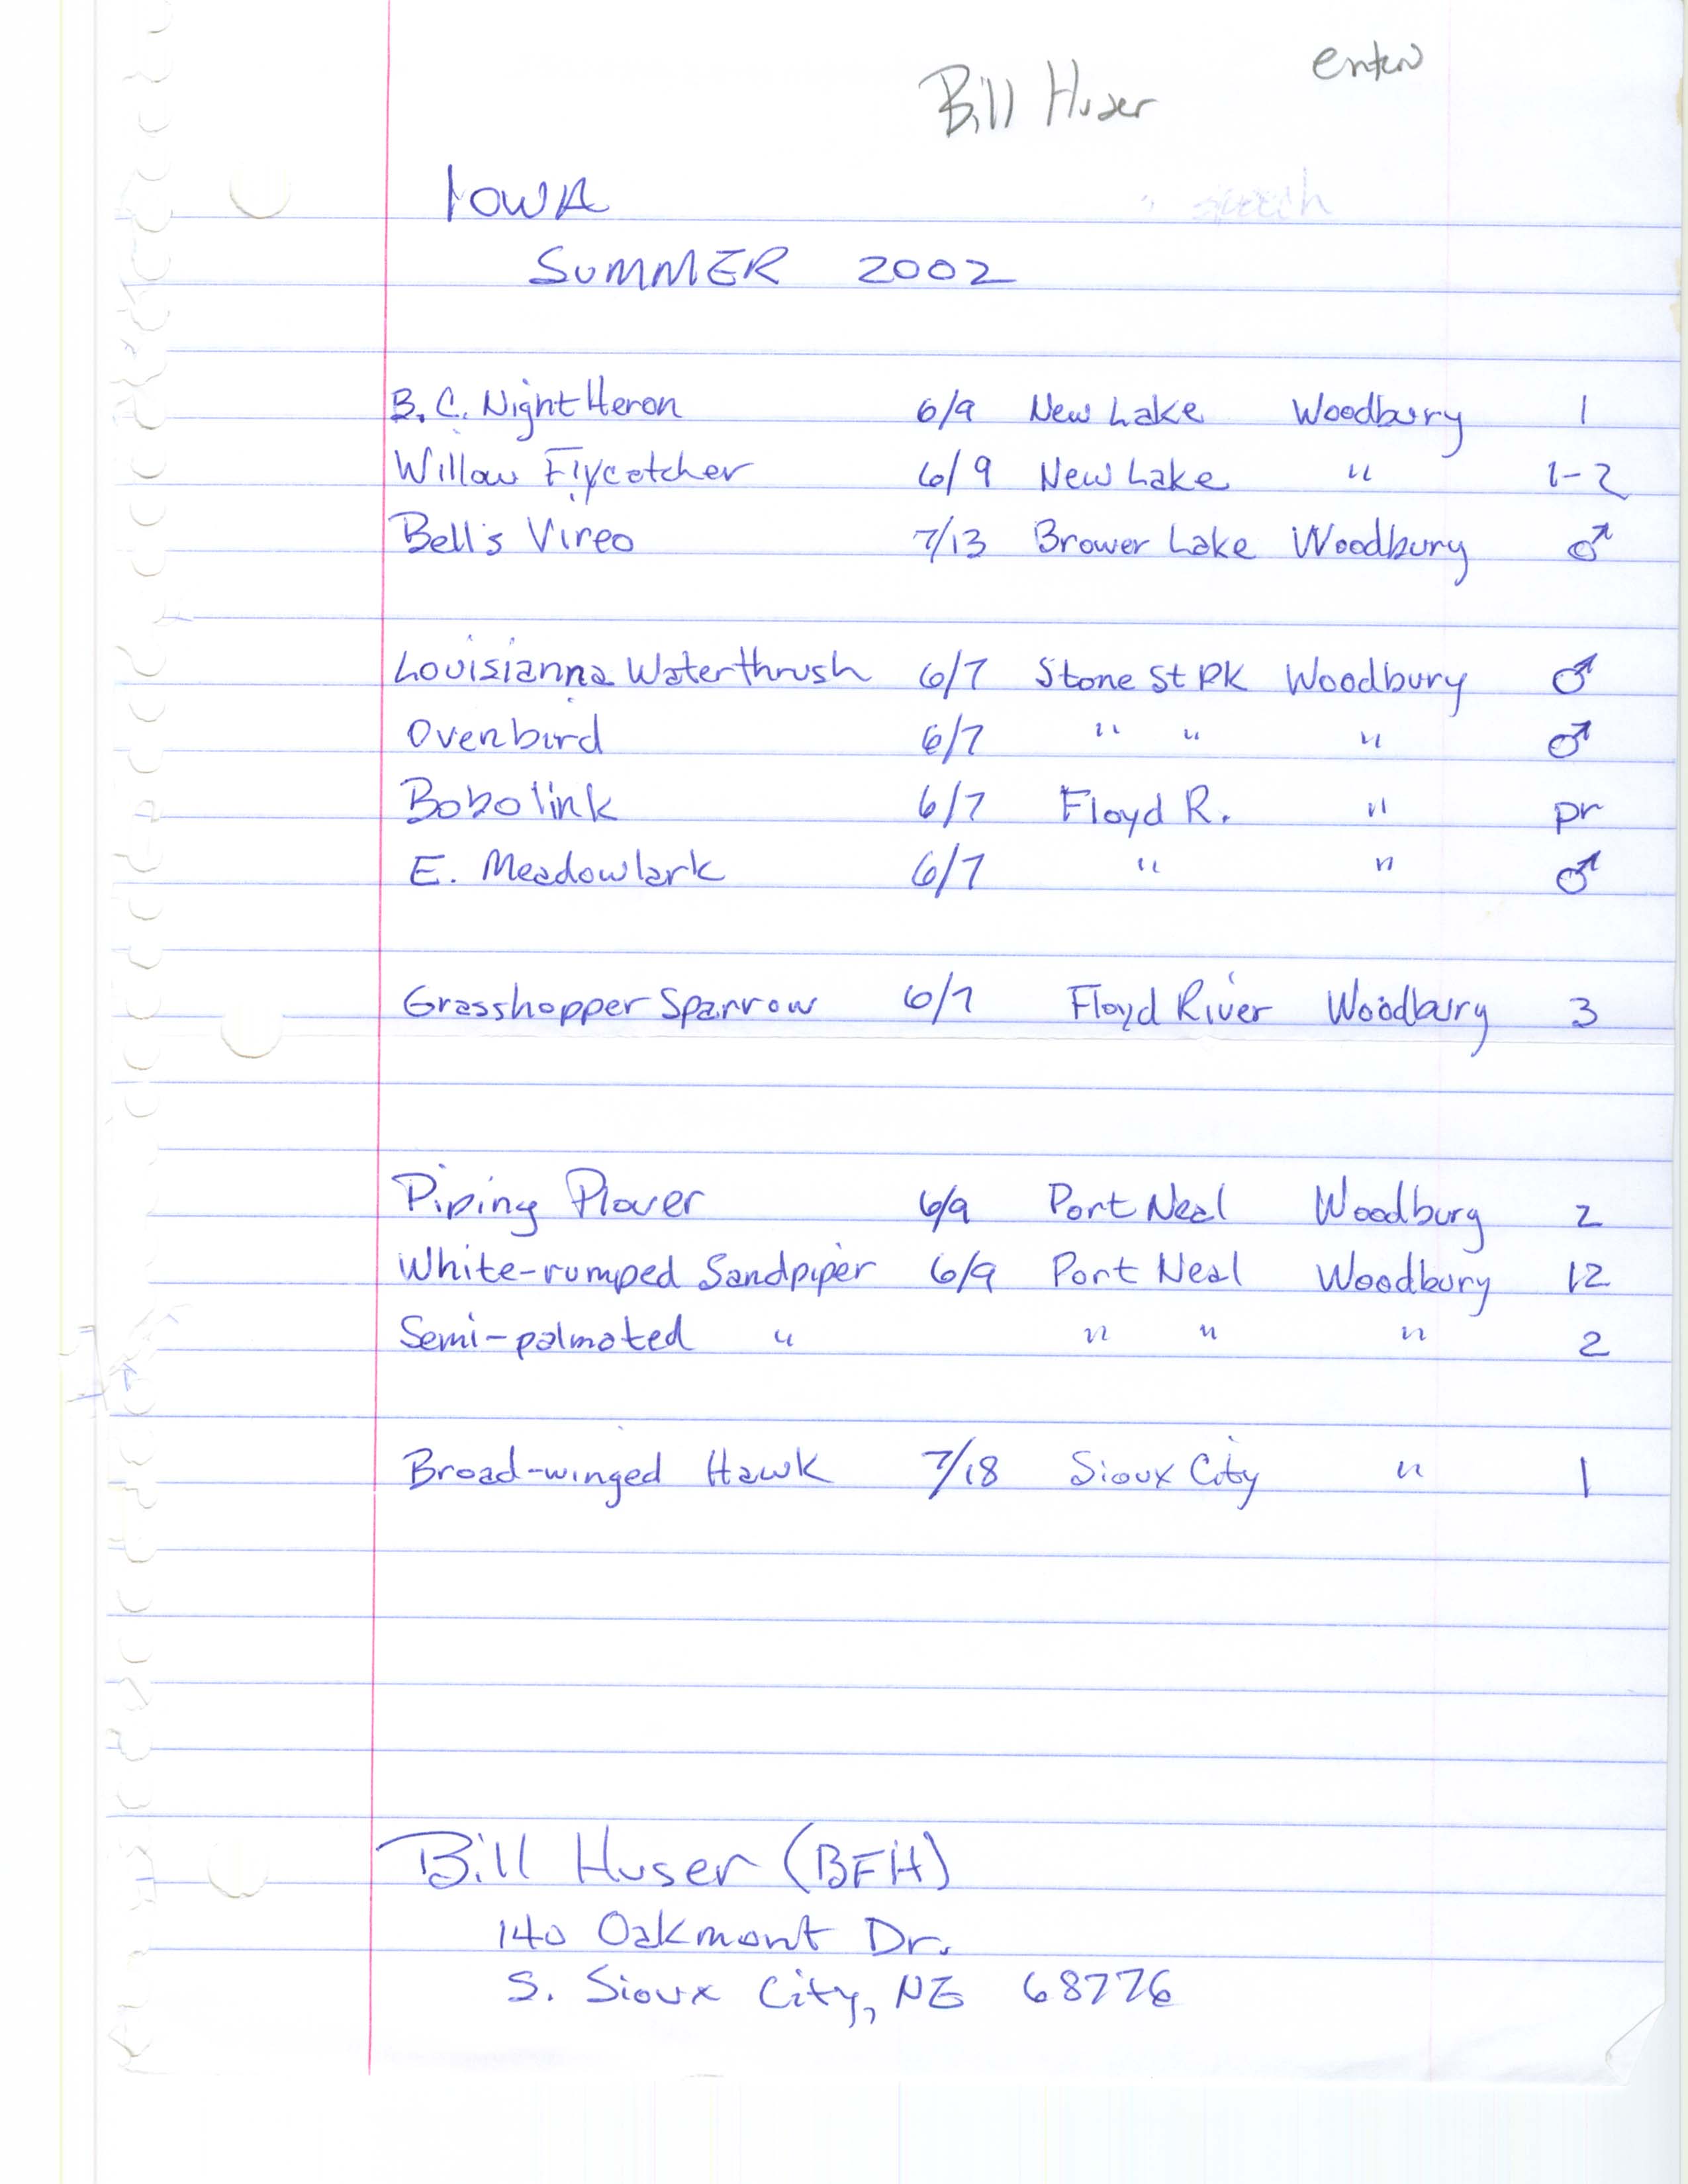 Field notes contributed by Bill F. Huser, summer 2002